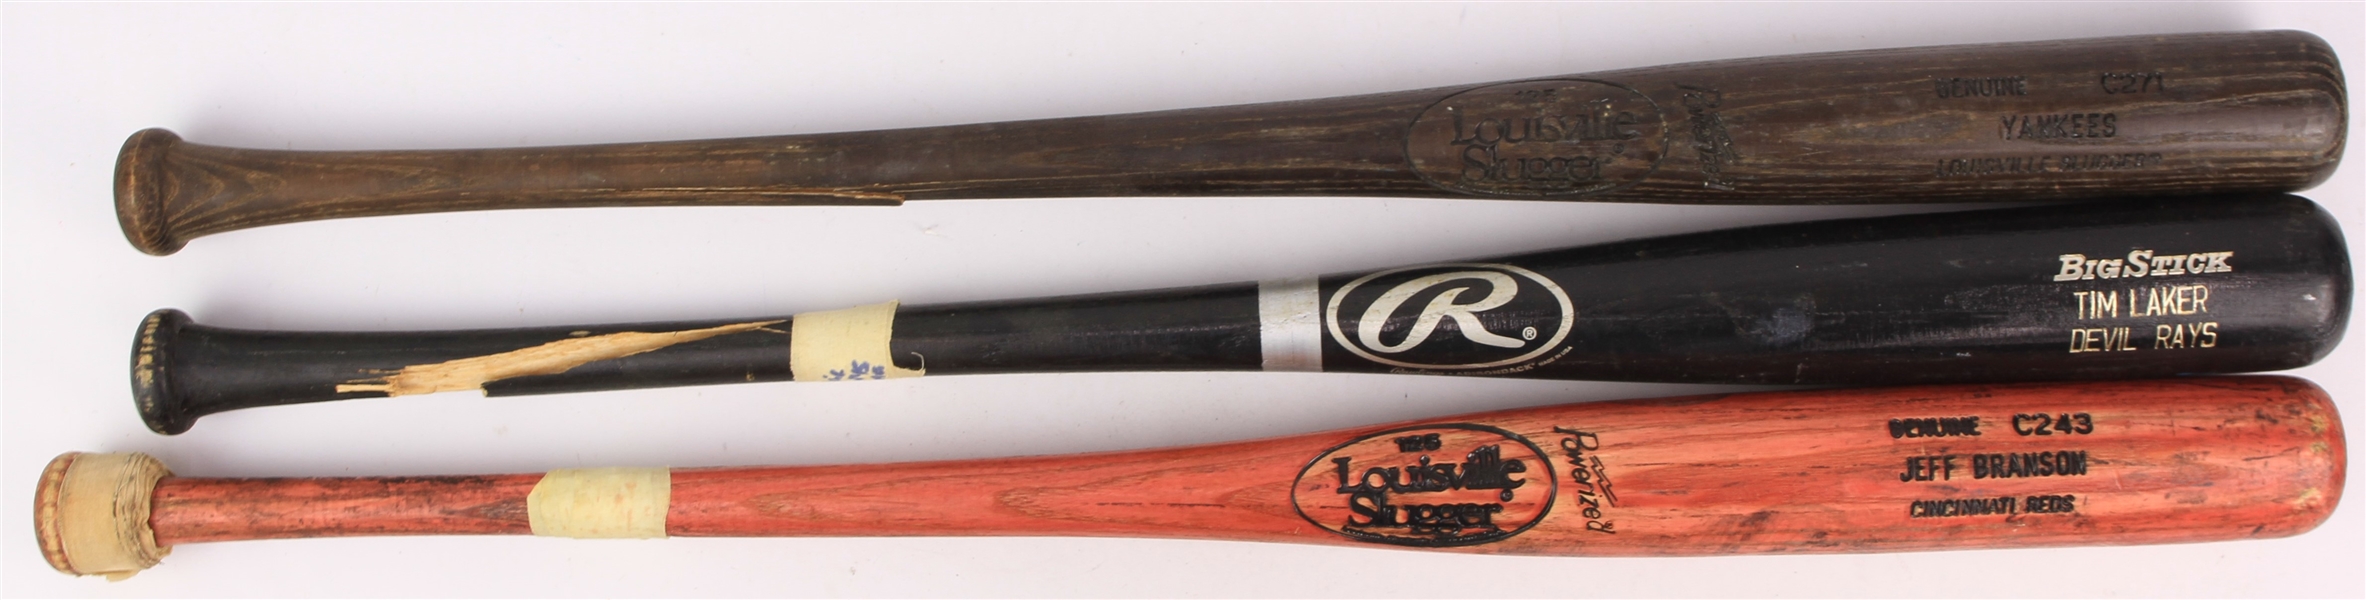 1980s-2000s Professional Model Game Used Bat Collection - Lot of 3 w/ Jeff Branson, Tim Laker & Yankees (MEARS LOA/Mets Employee LOA)